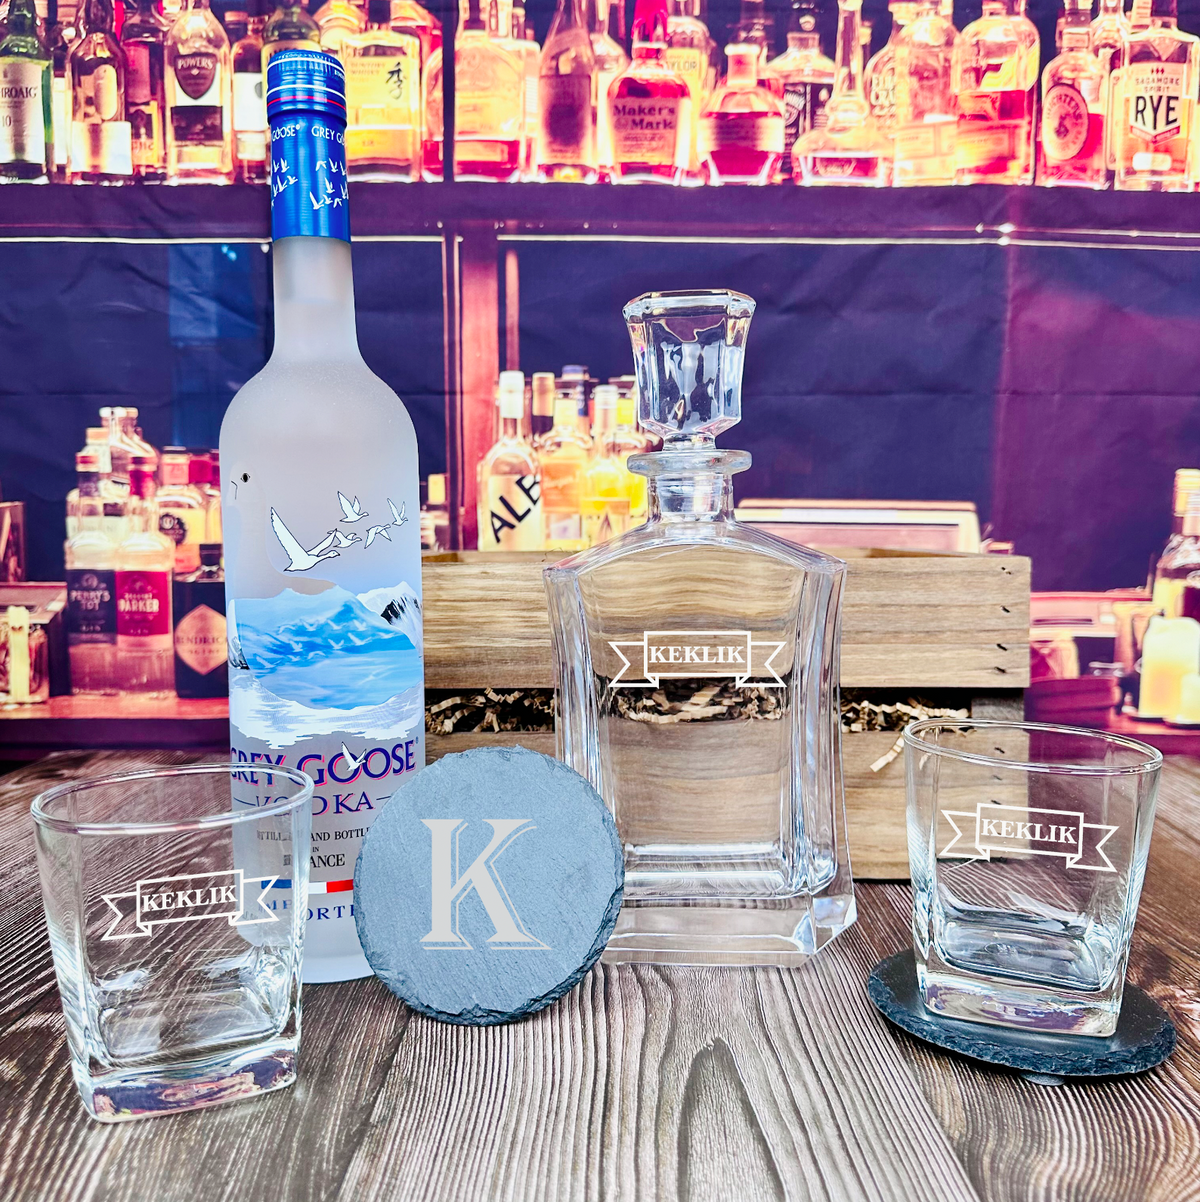  Grey Goose Vodka Glasses - Tumblers- Made From Recycled Bottles  : Handmade Products